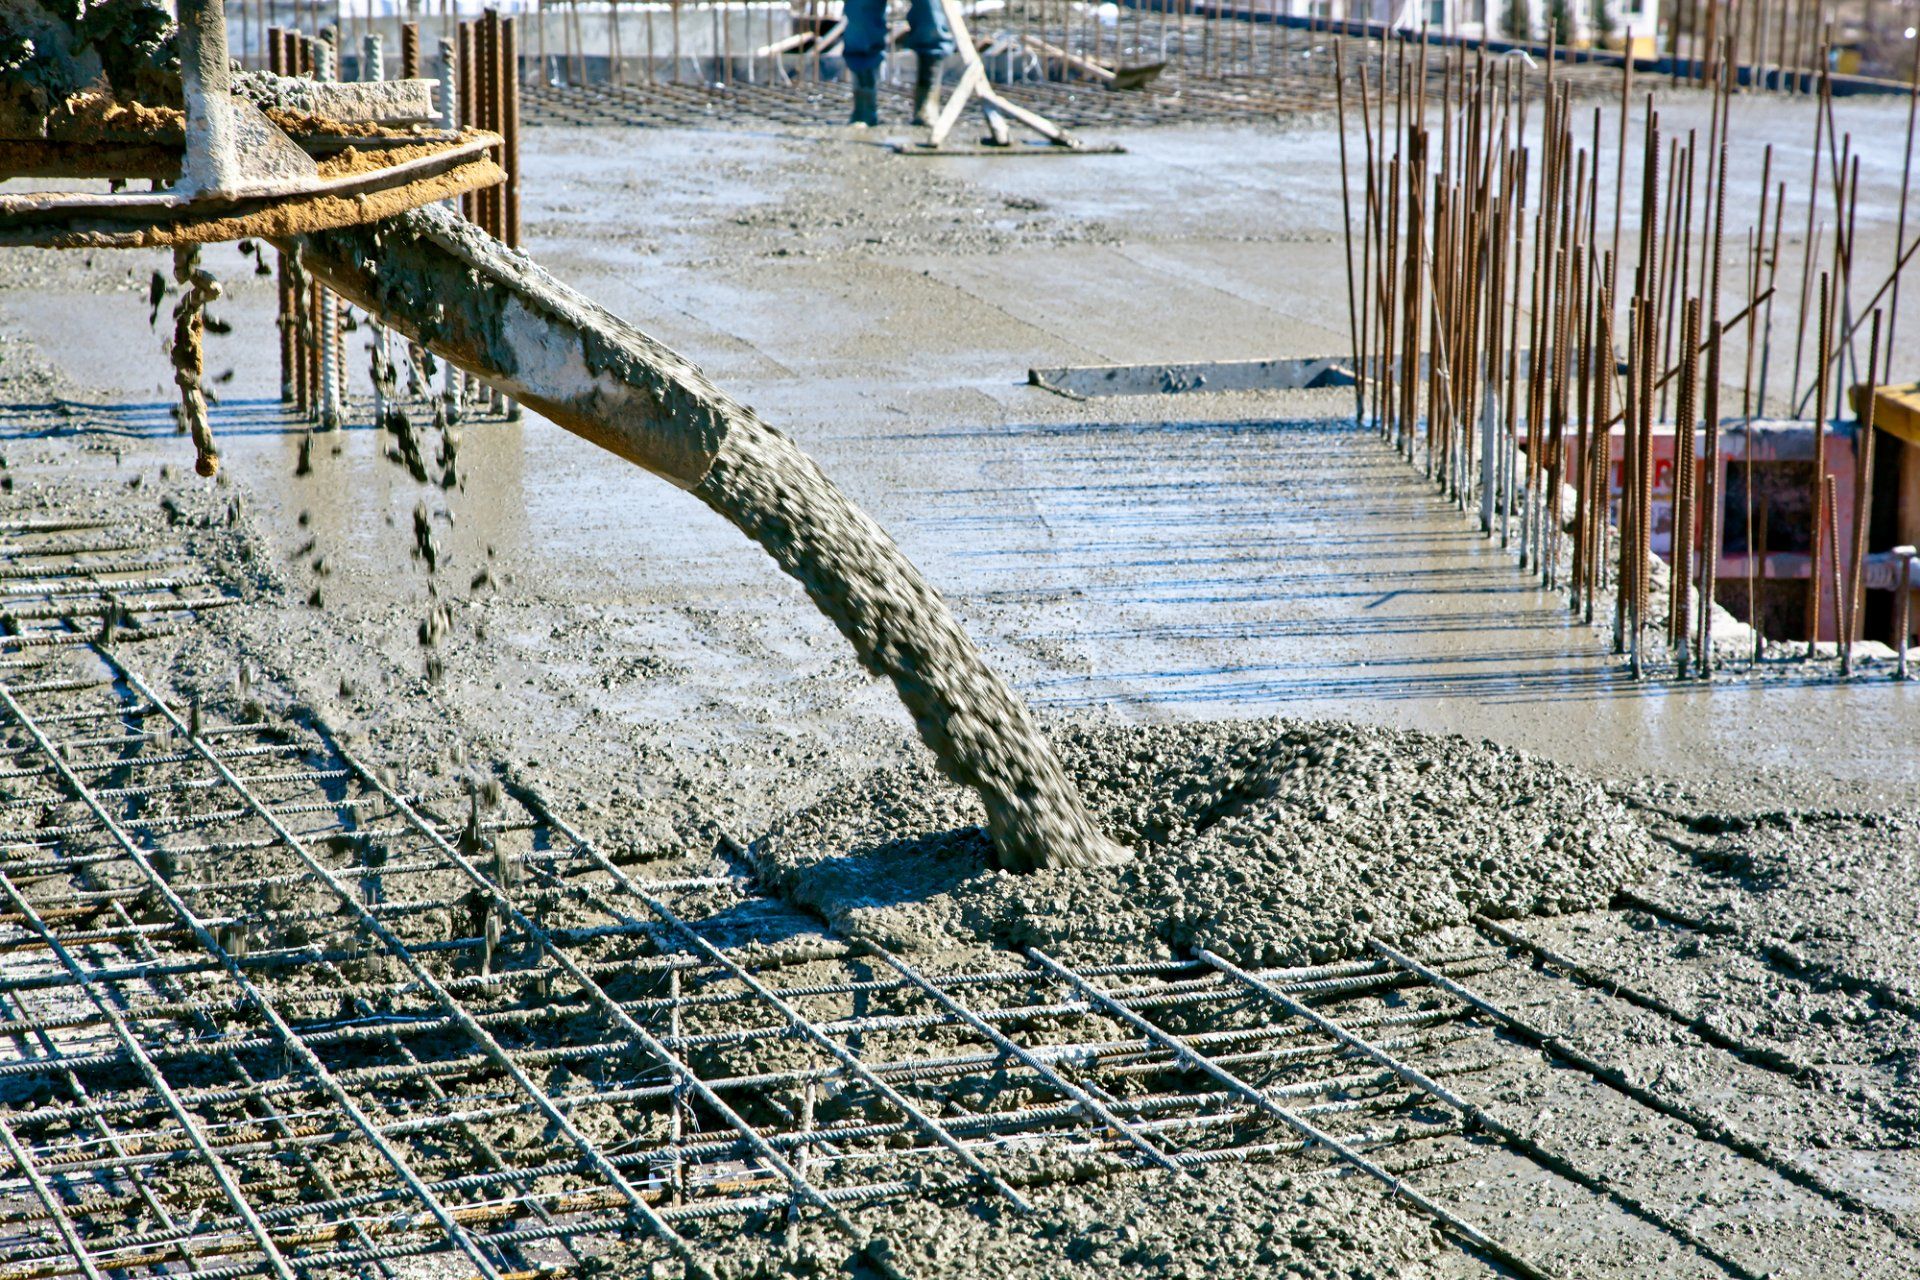 a specialized equipment is used to pour concrete mix into the frame